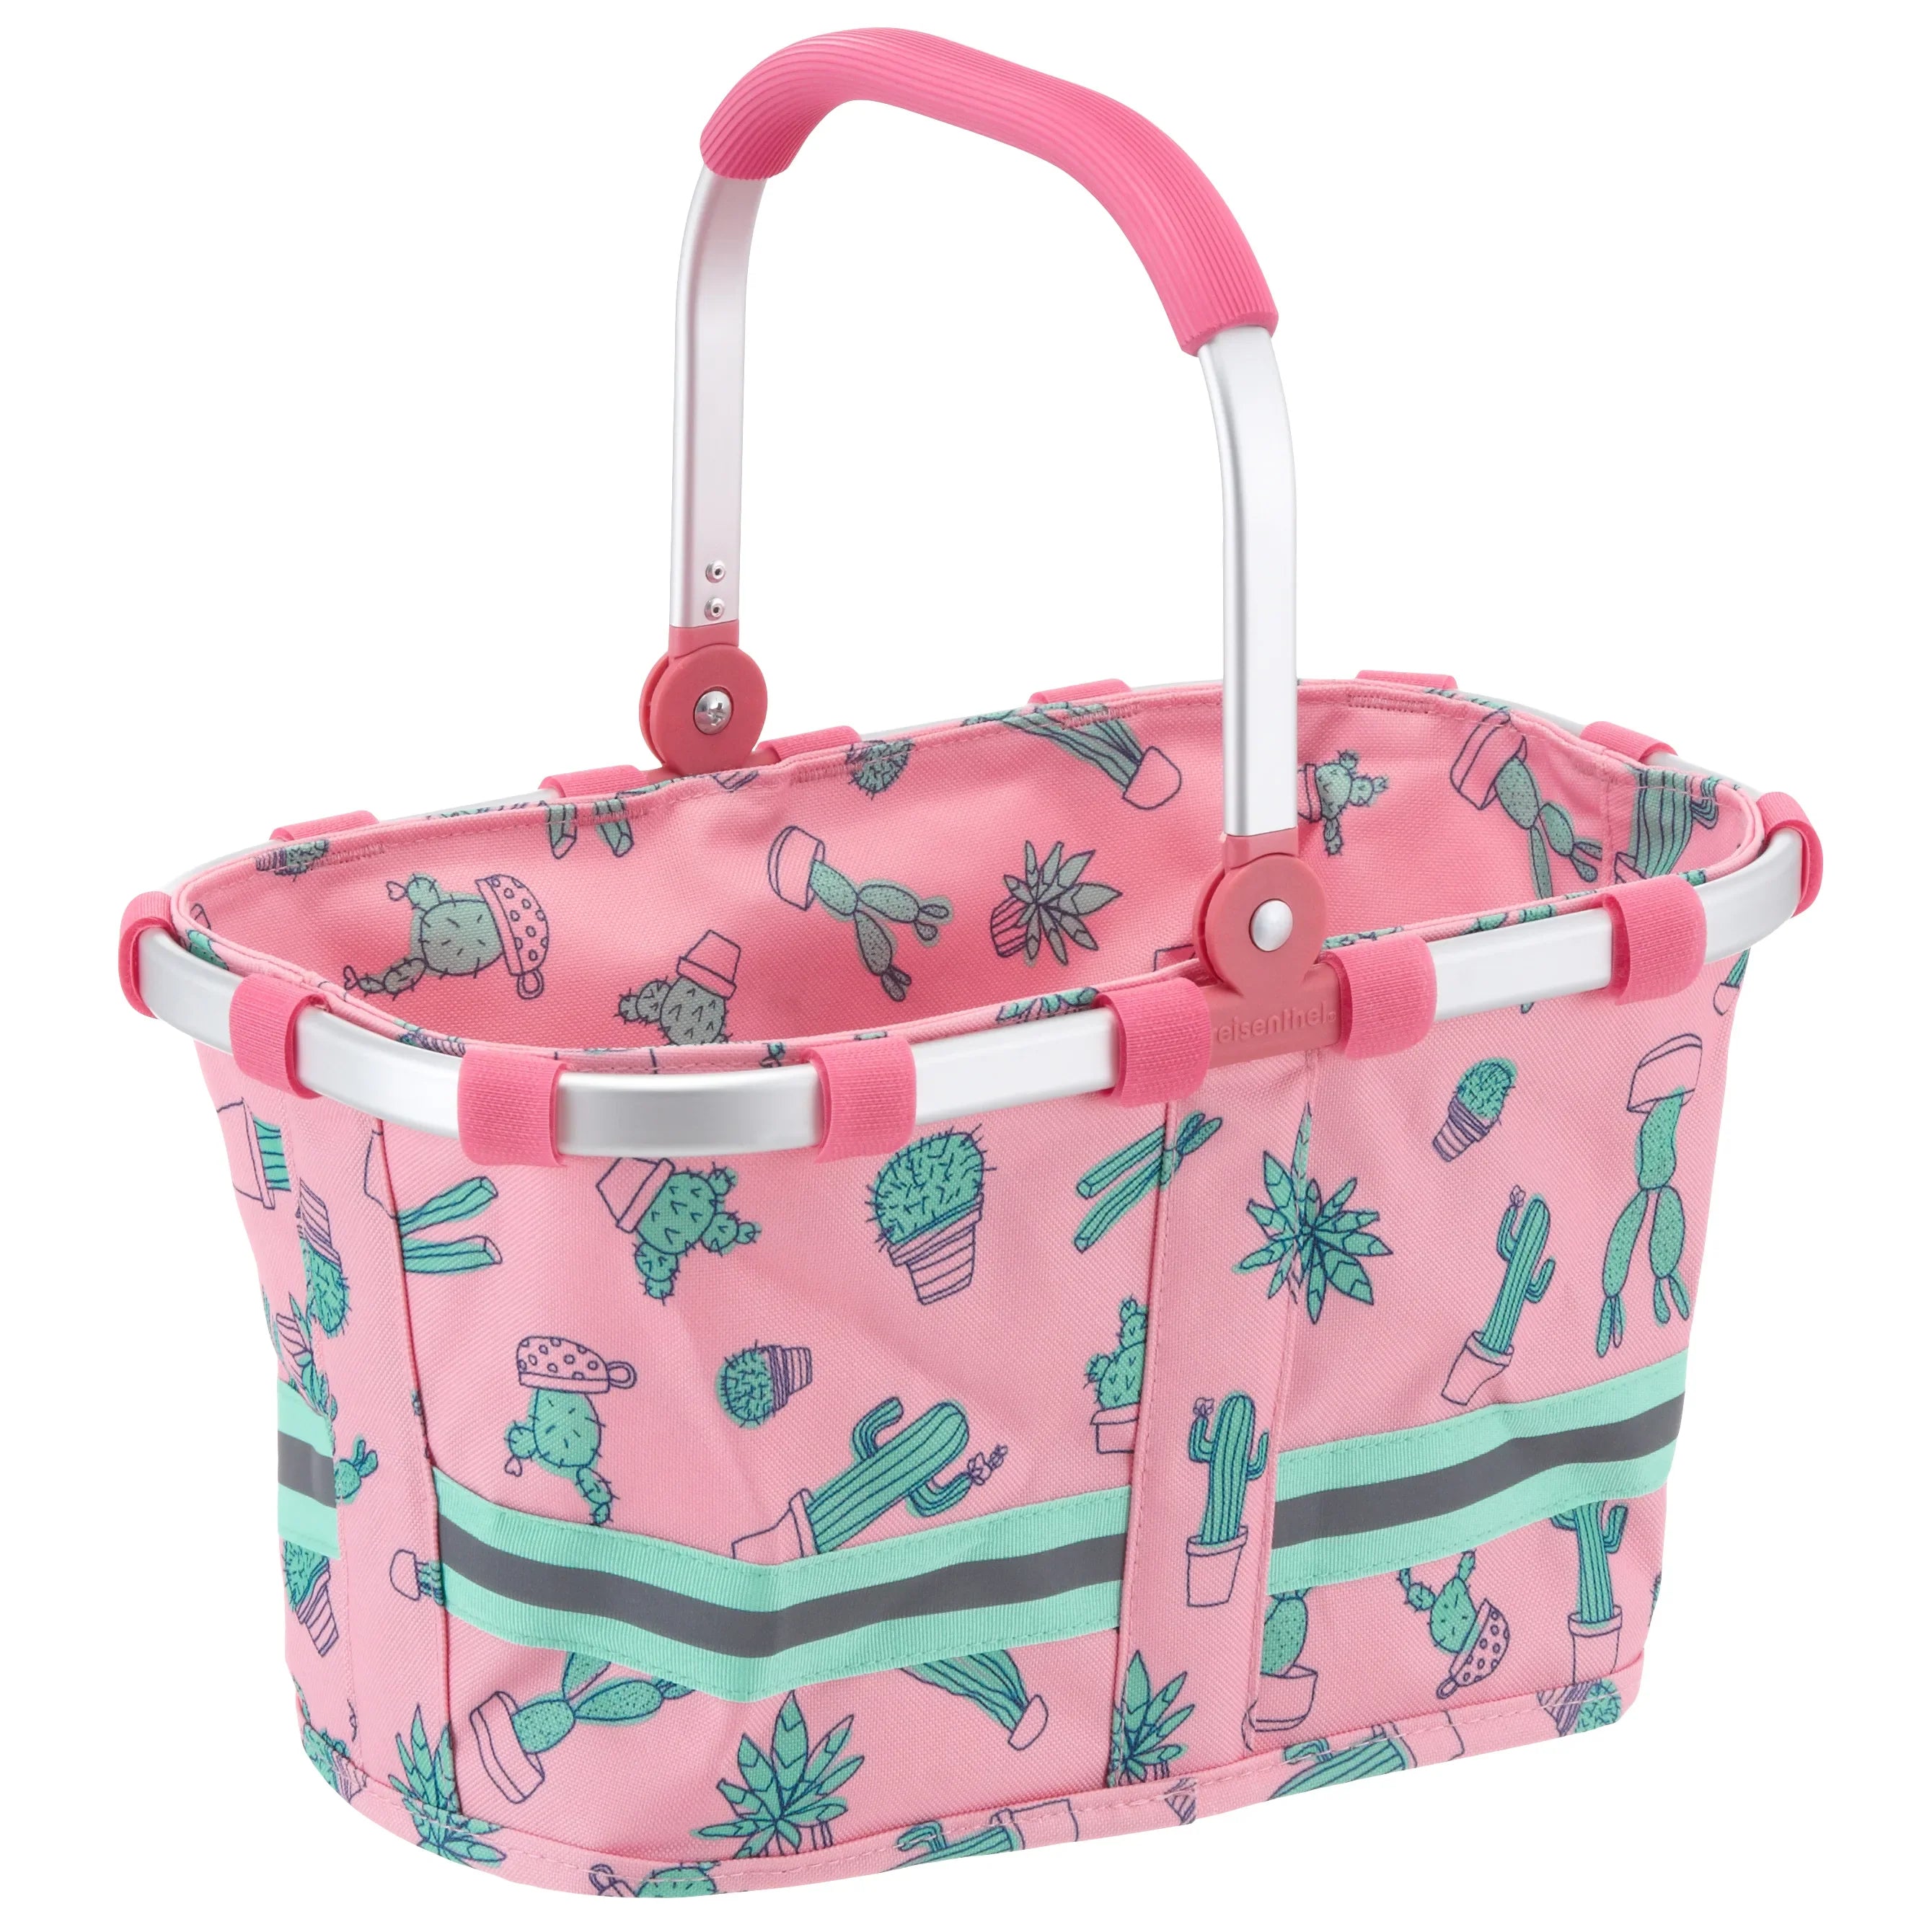 Reisenthel Kids Carrybag XS 33 cm - cats and dogs rose